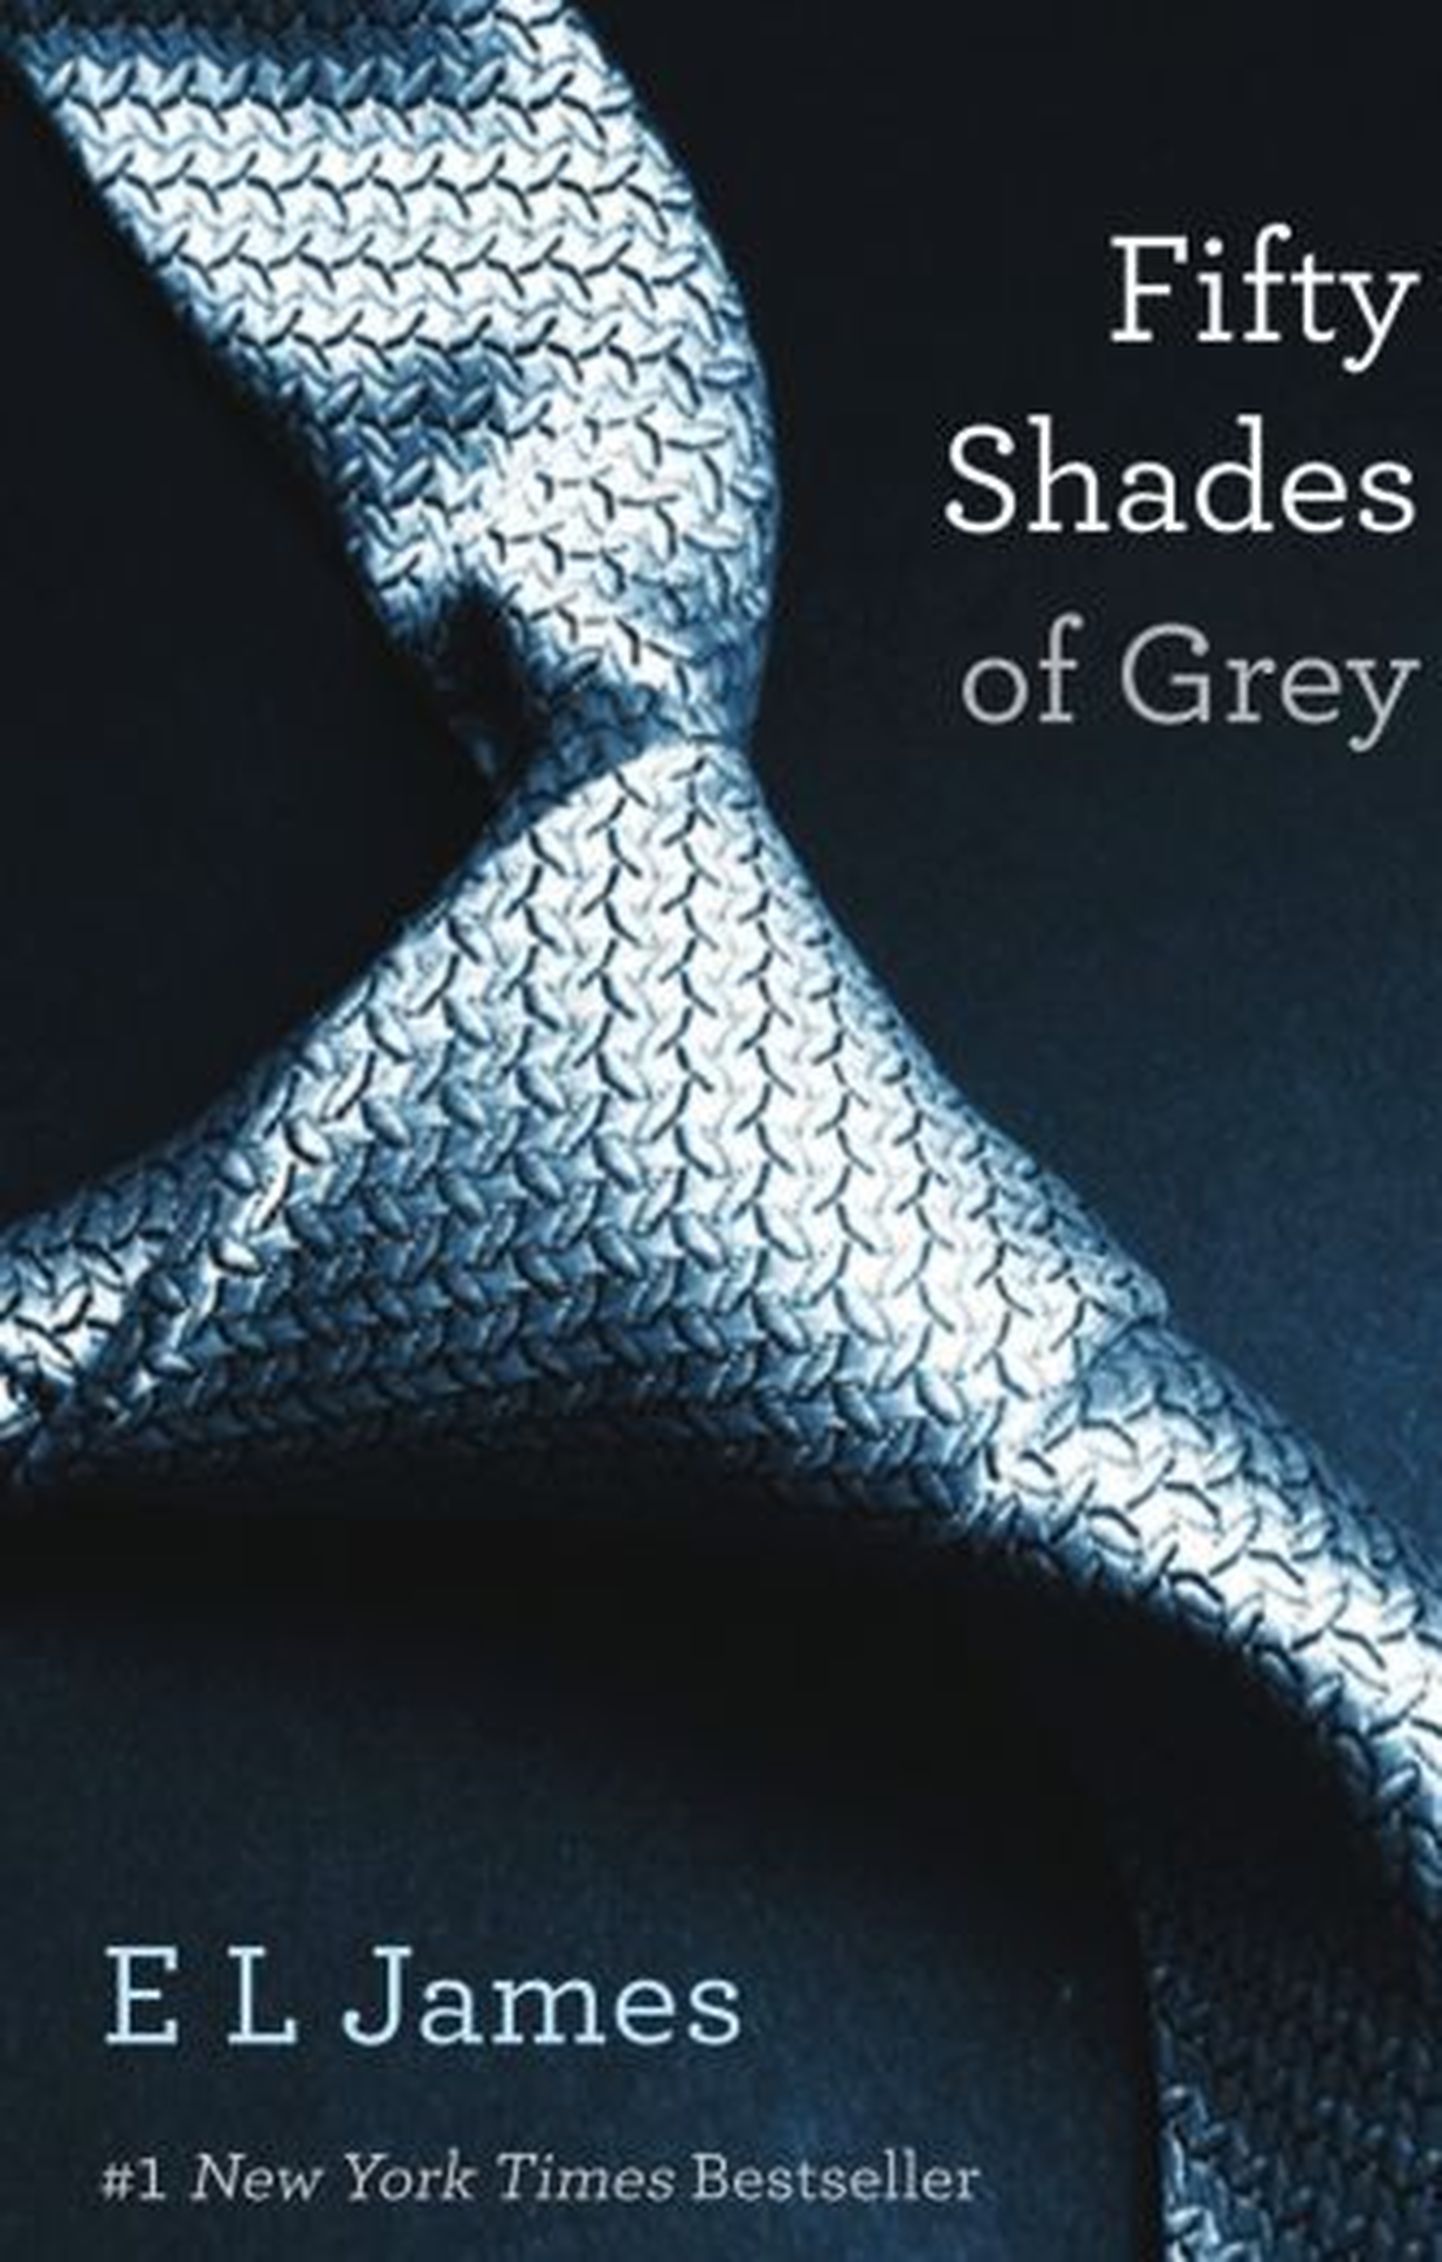 «Fifty Shades of Gray» esikaas